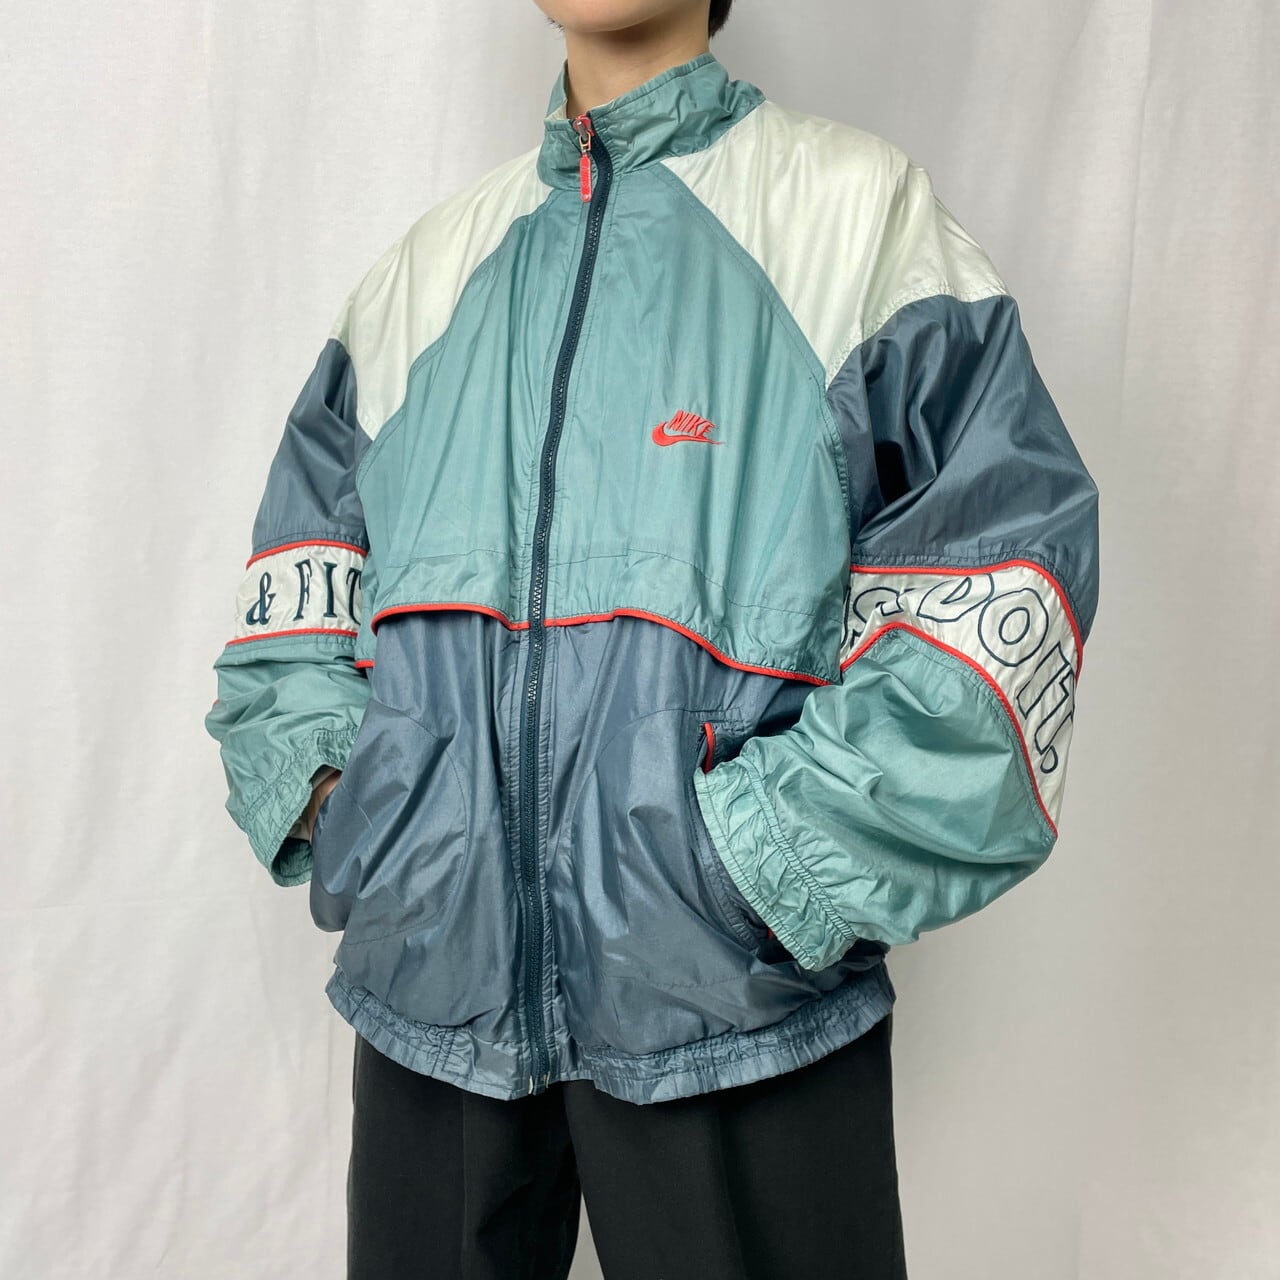 80s～90s NIKE JUST DO IT 銀タグ L ヴィンテージ L